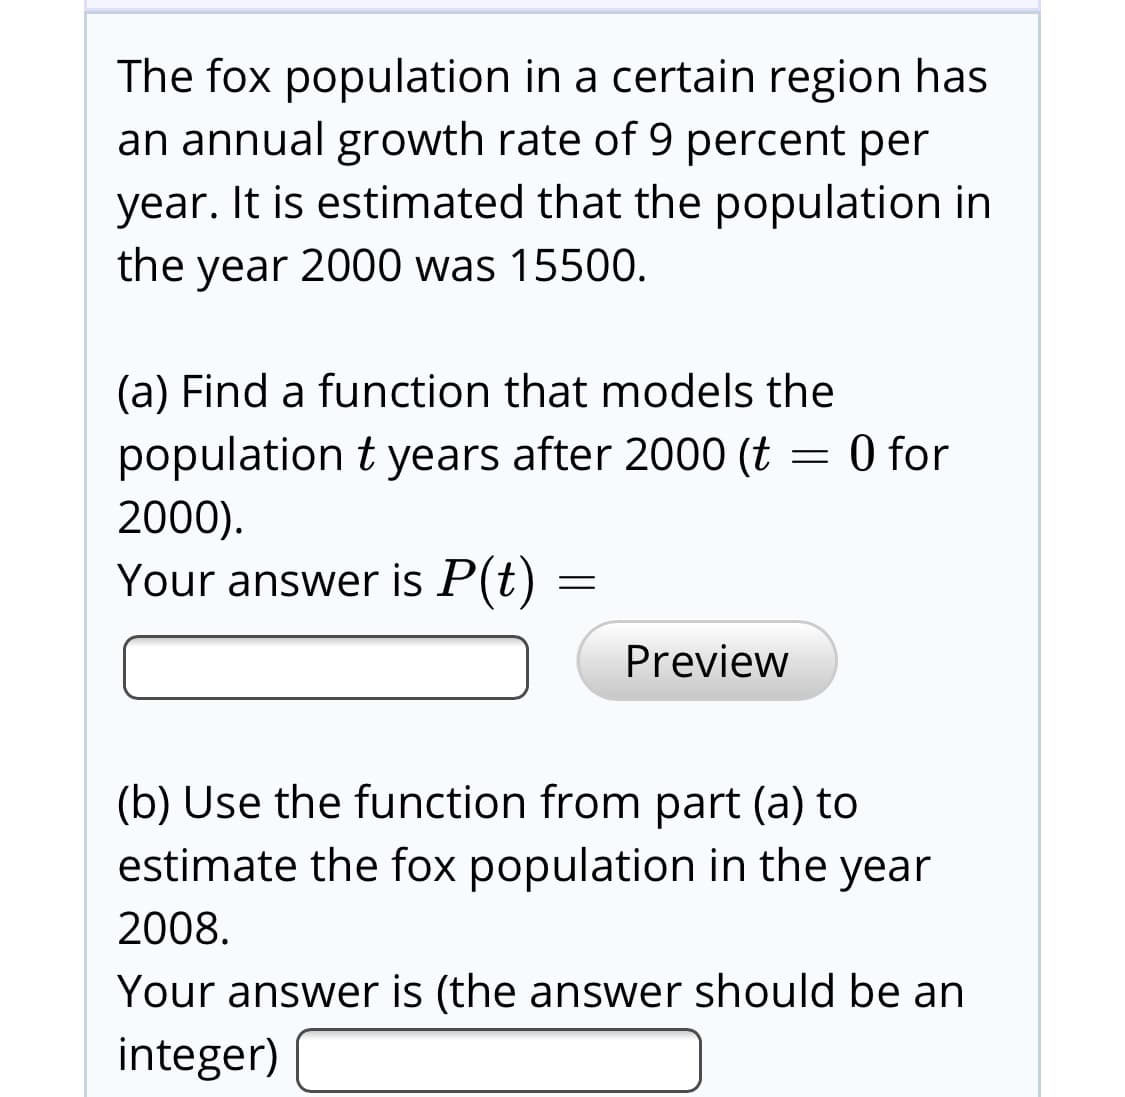 The fox population in a certain region has
an annual growth rate of 9 percent per
year. It is estimated that the population in
the year 2000 was 15500.
(a) Find a function that models the
population t years after 2000 (t = 0 for
2000).
Your answer is P(t)
Preview
(b) Use the function from part (a) to
estimate the fox population in the year
2008.
Your answer is (the answer should be an
integer)
